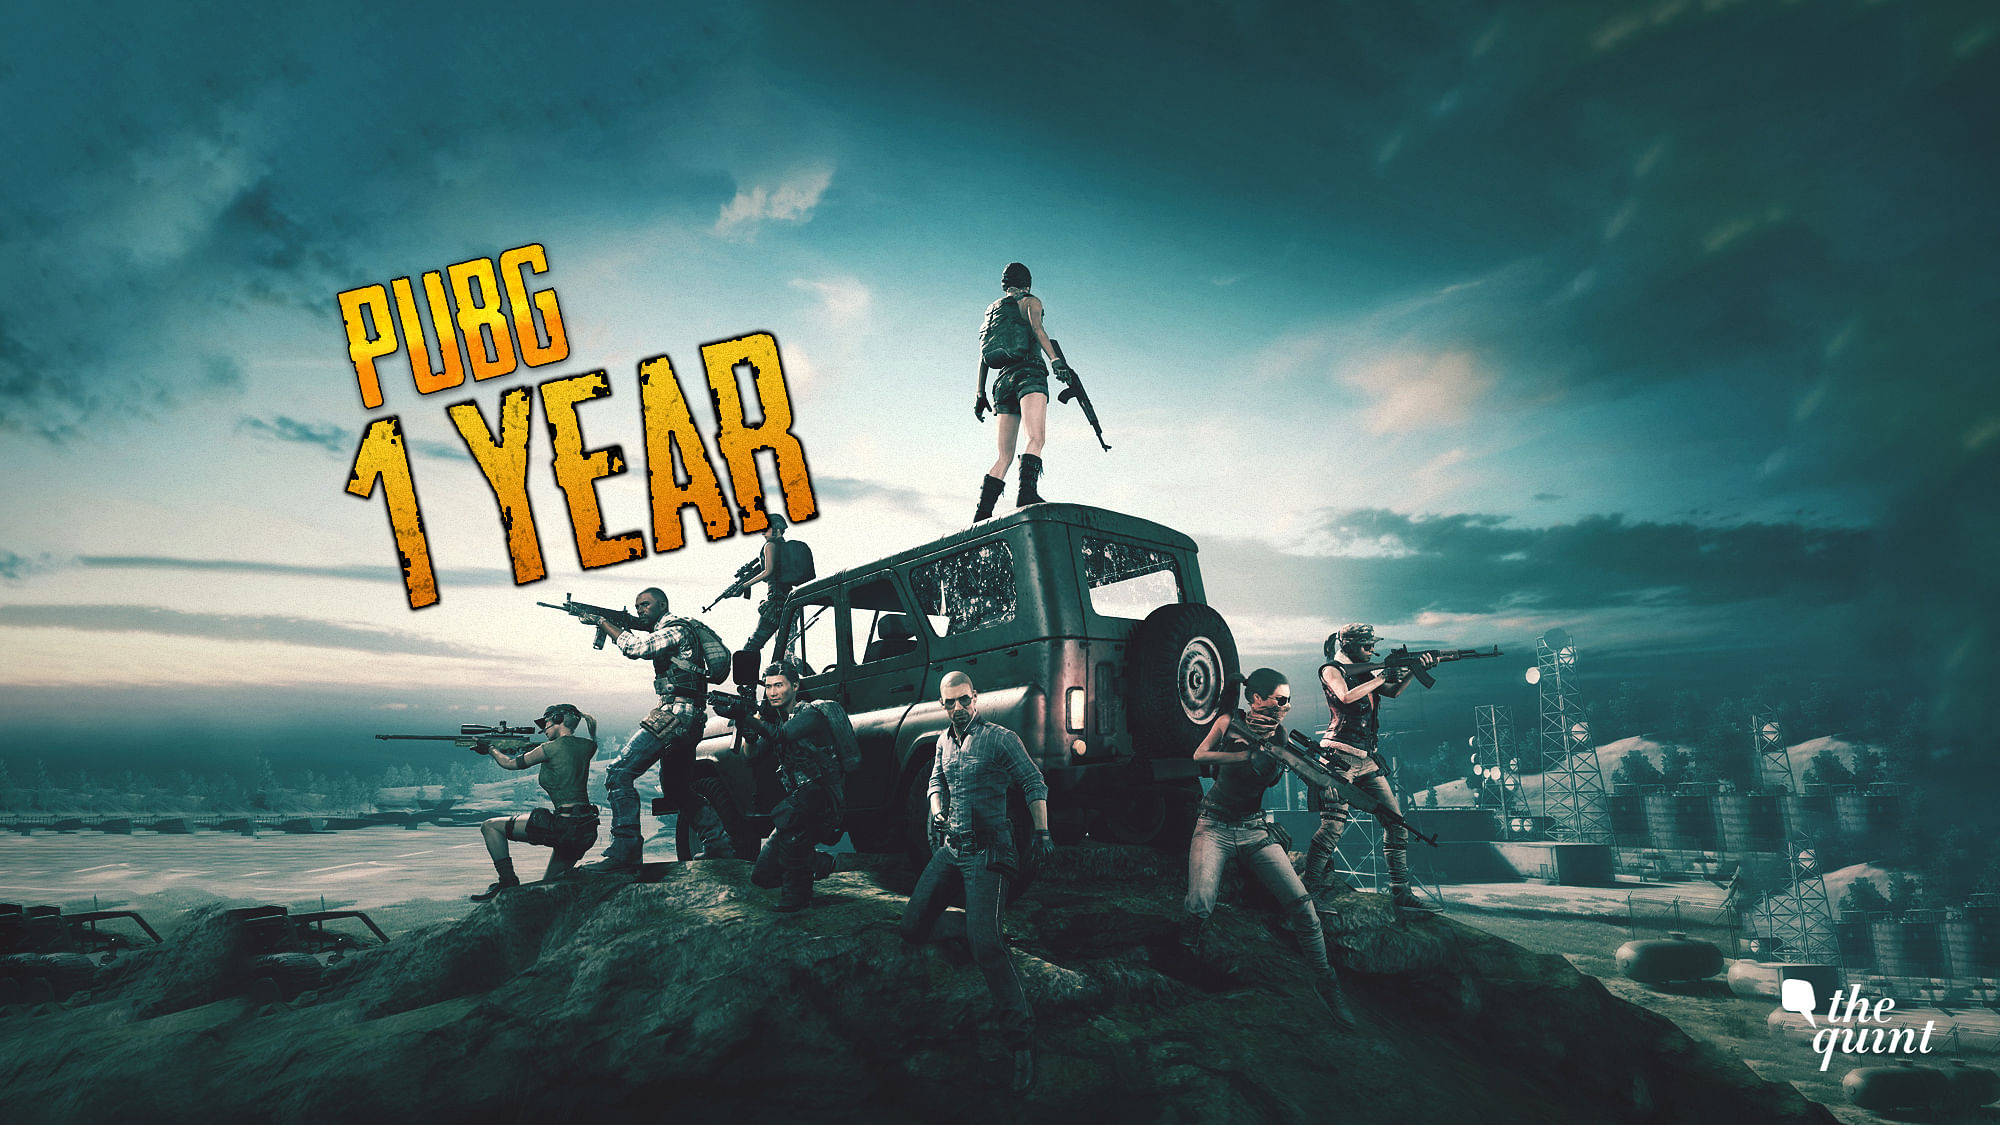 PUBG on mobile was released on 9 February 2018.